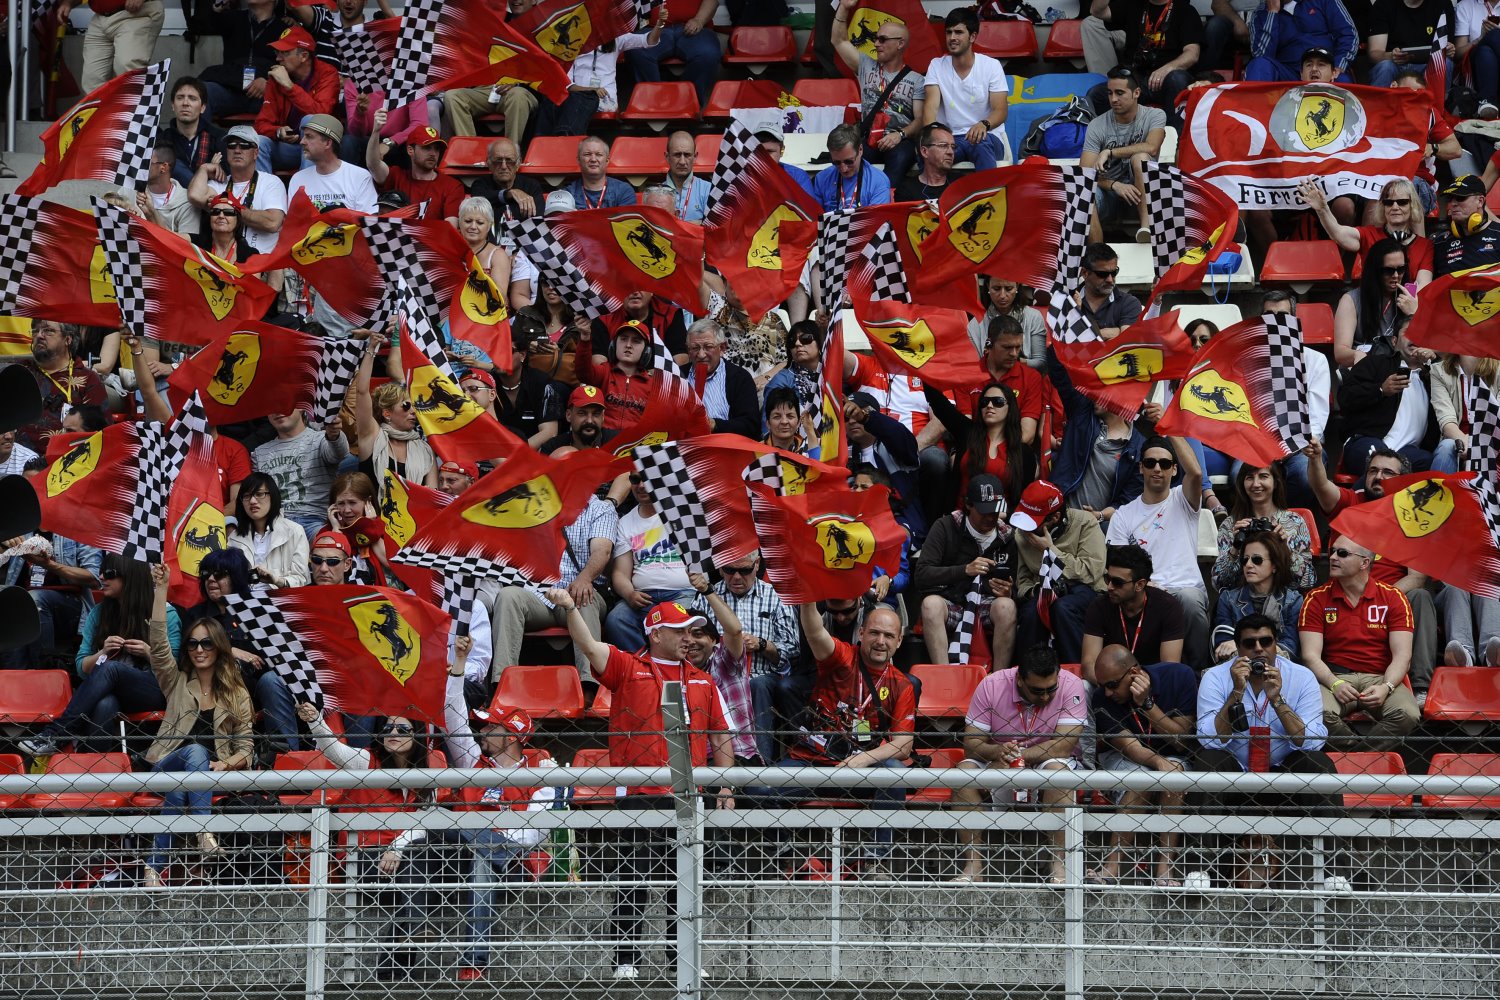 An F1 race just won't be the same without the tifosi